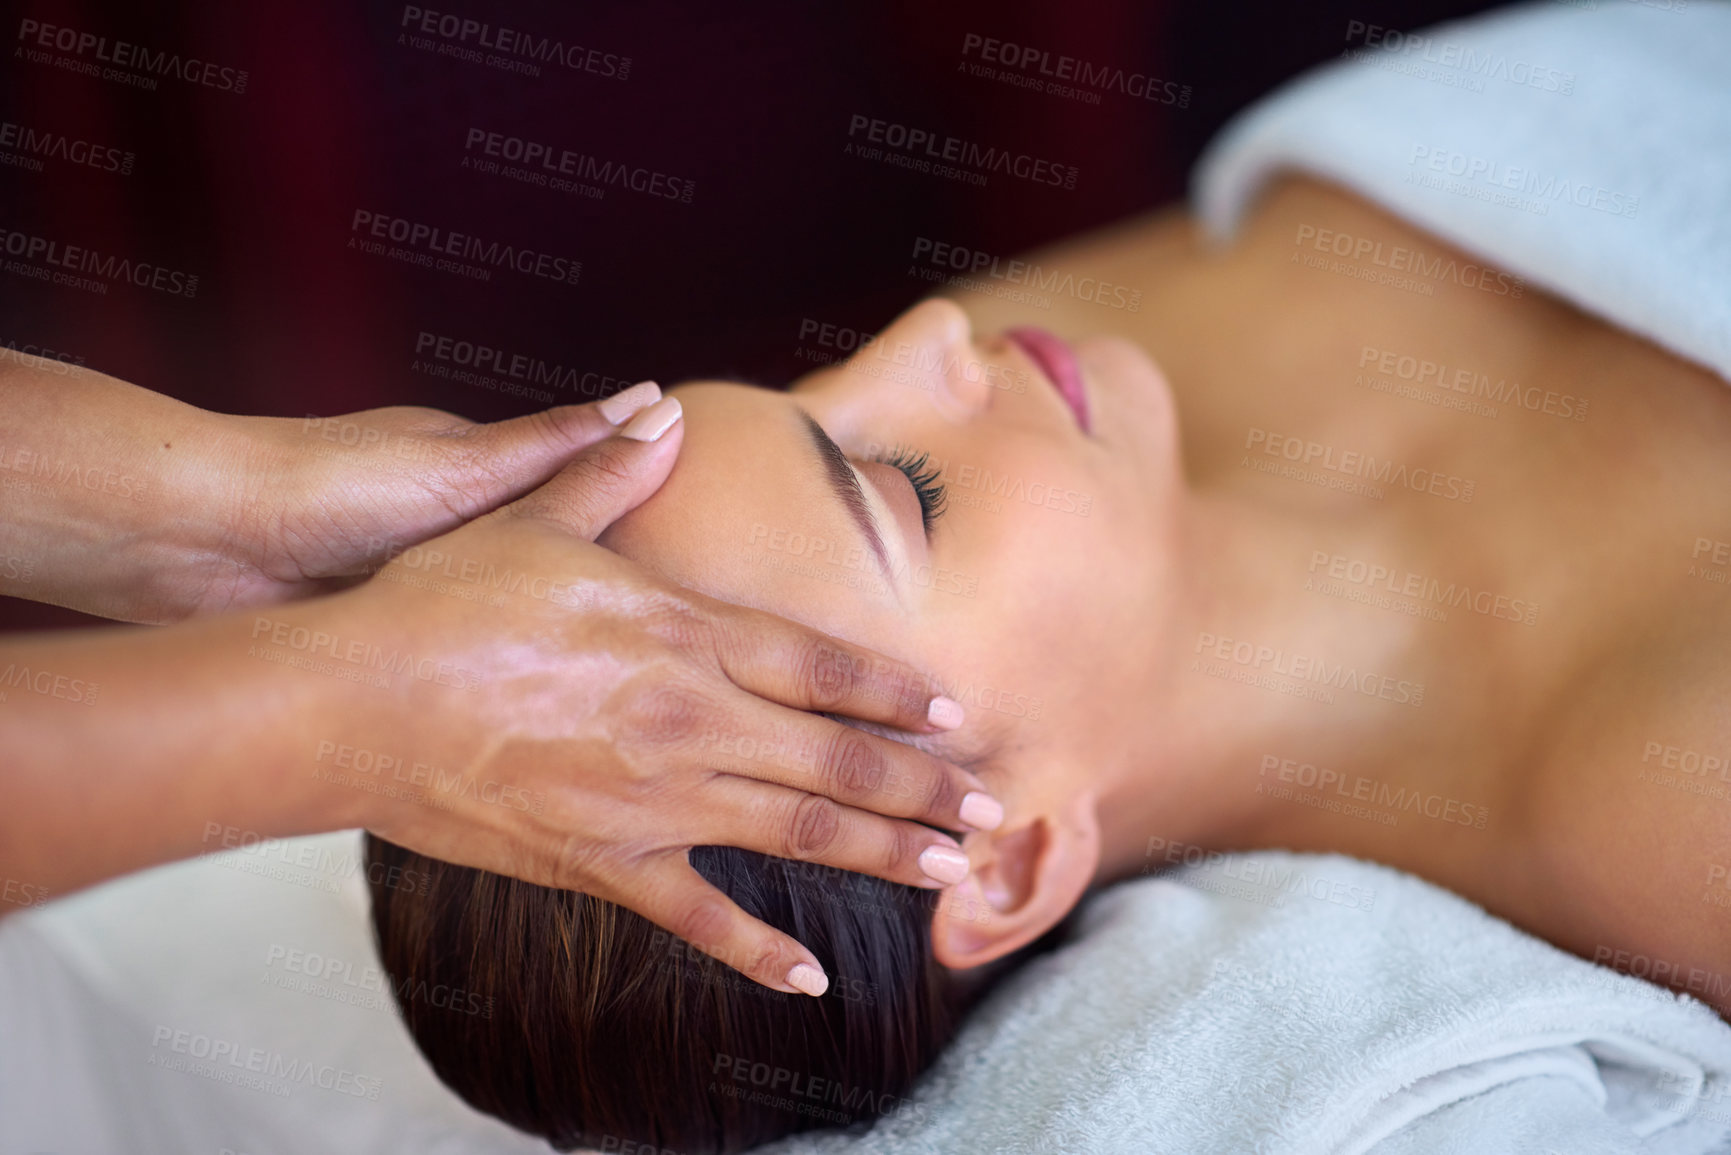 Buy stock photo Shot of a young woman receiving a head massage at a spa